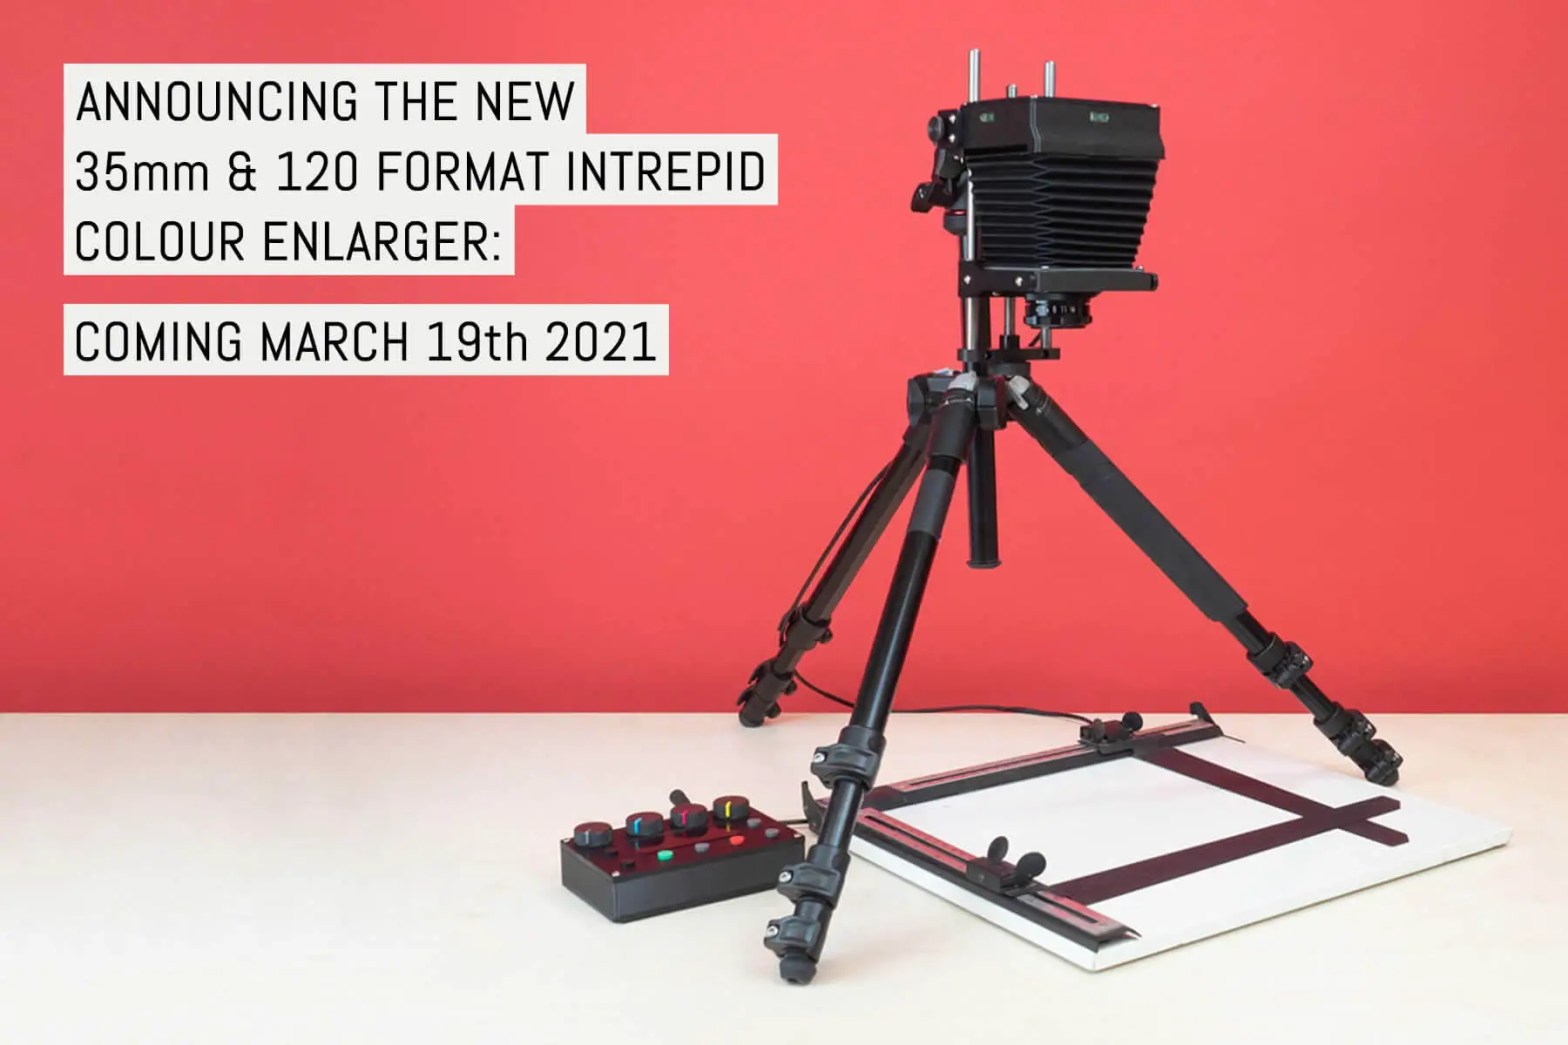 Announcing the new 35mm & 120 format Intrepid colour Enlarger: coming March 19th 2021